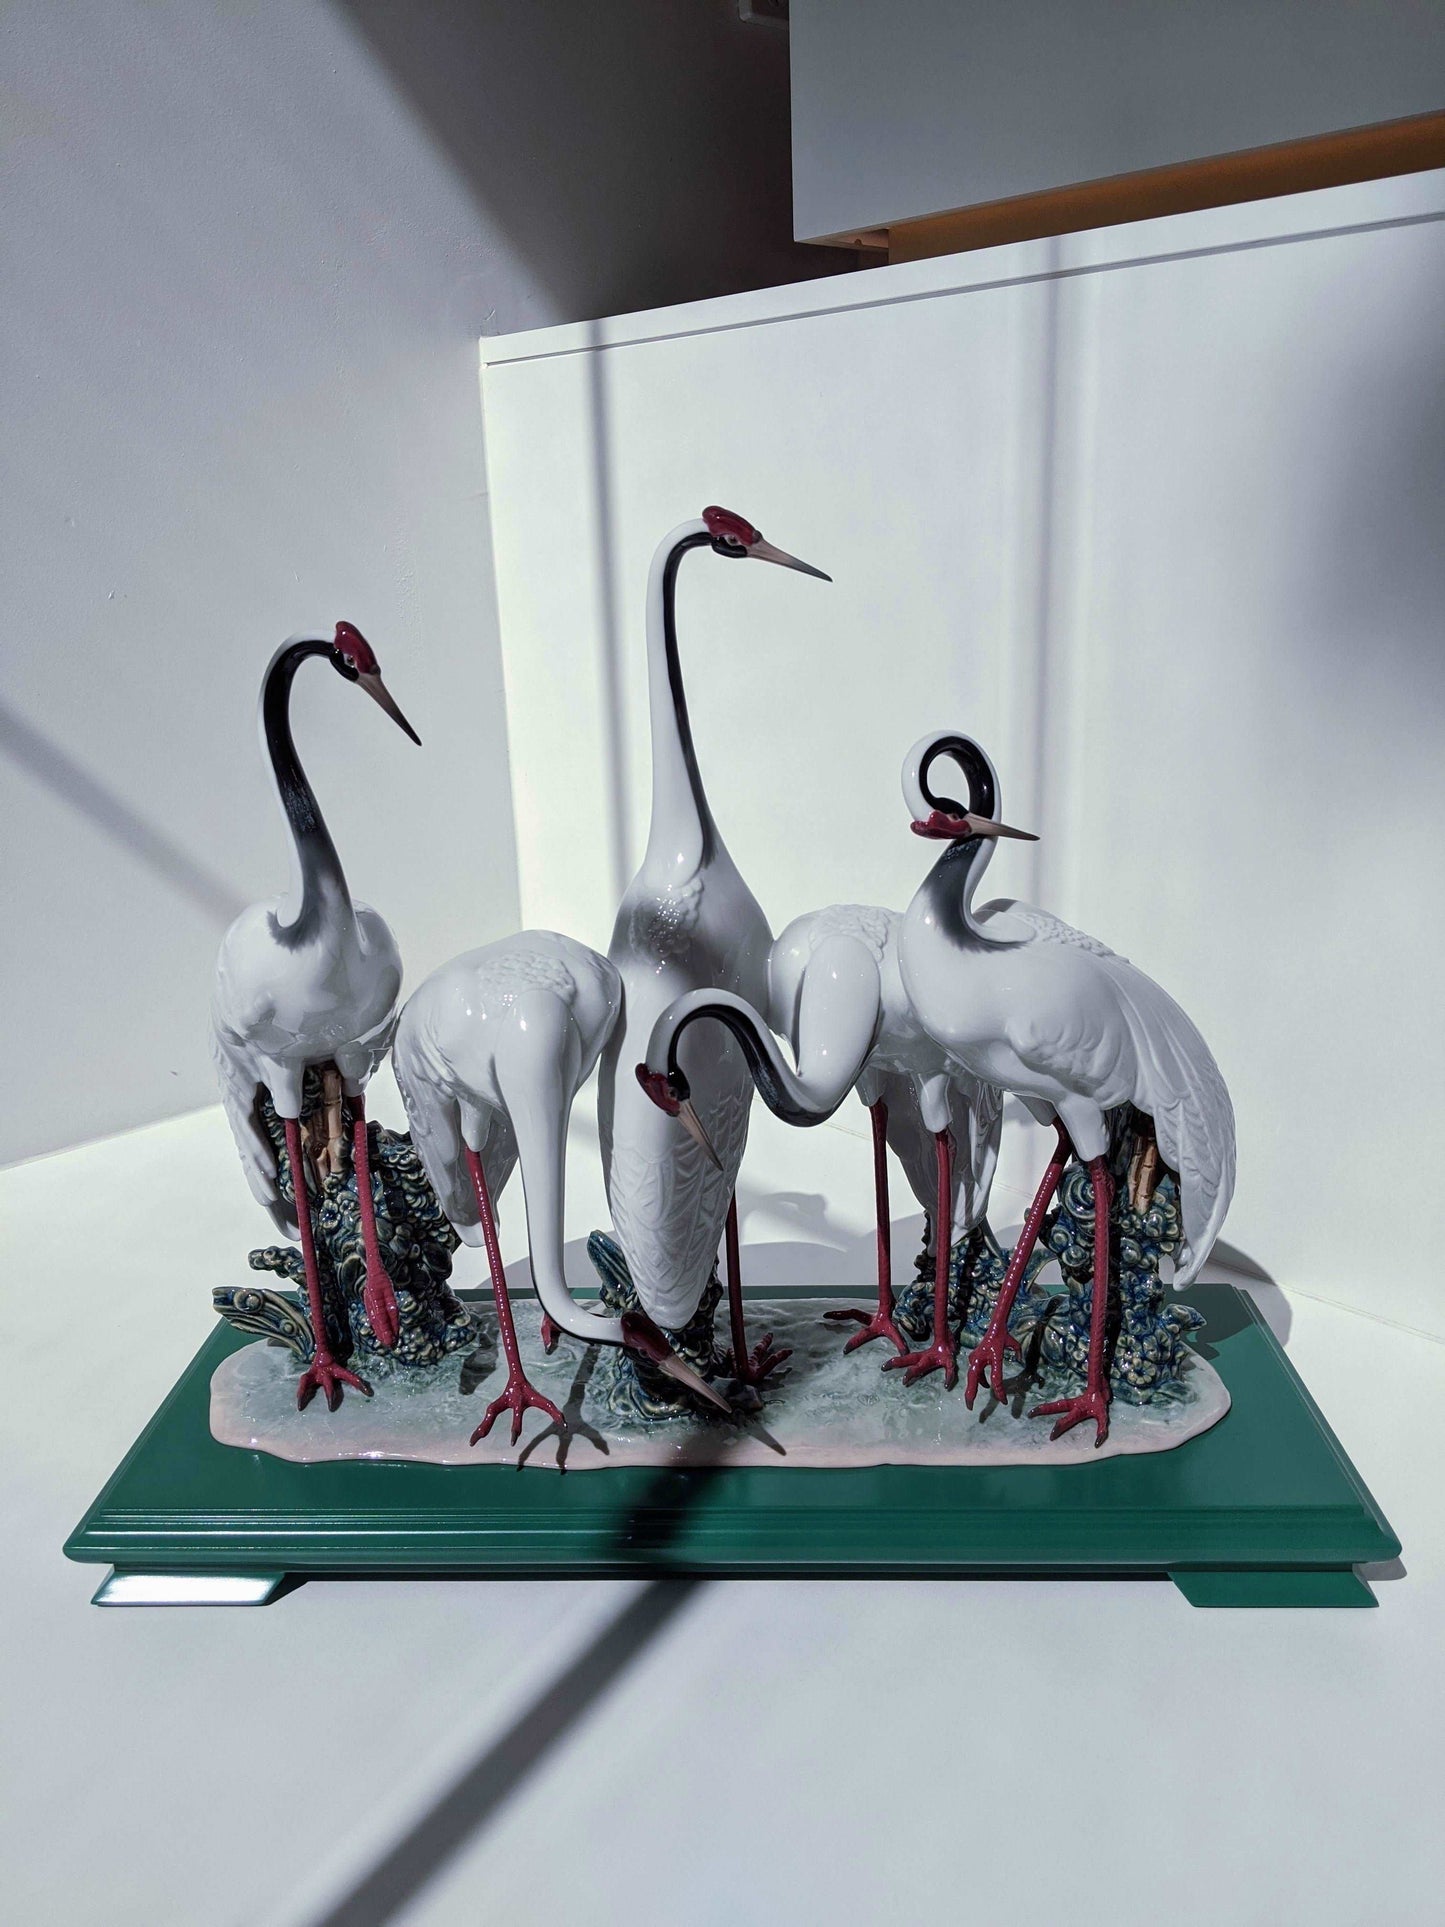 Flock of Cranes Sculpture Limited Edition